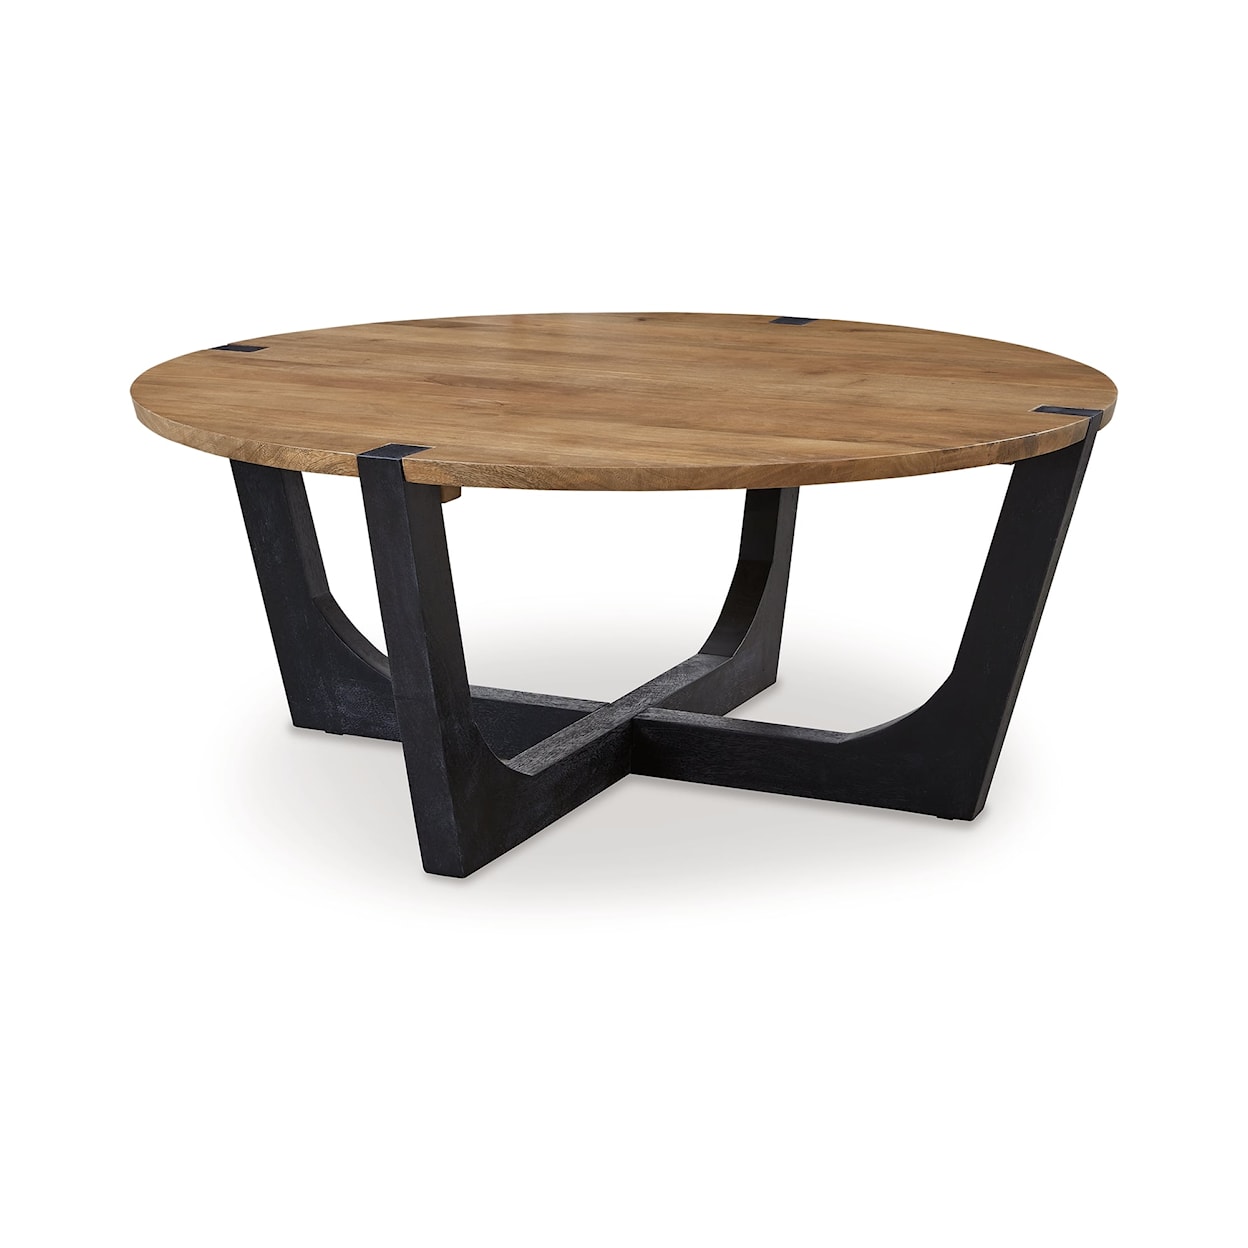 Signature Design by Ashley Hanneforth Round Coffee Table